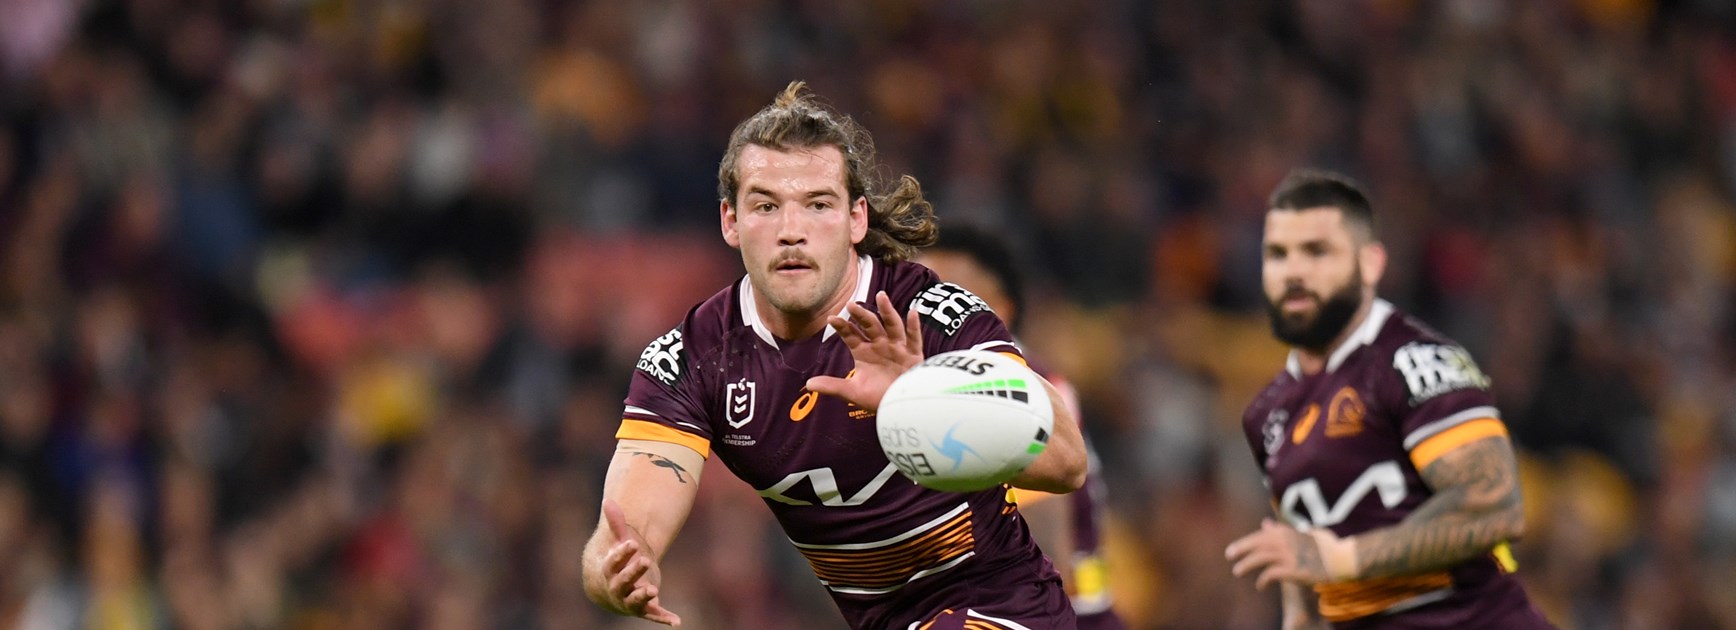 Refreshed Carrigan ready to charge for Broncos